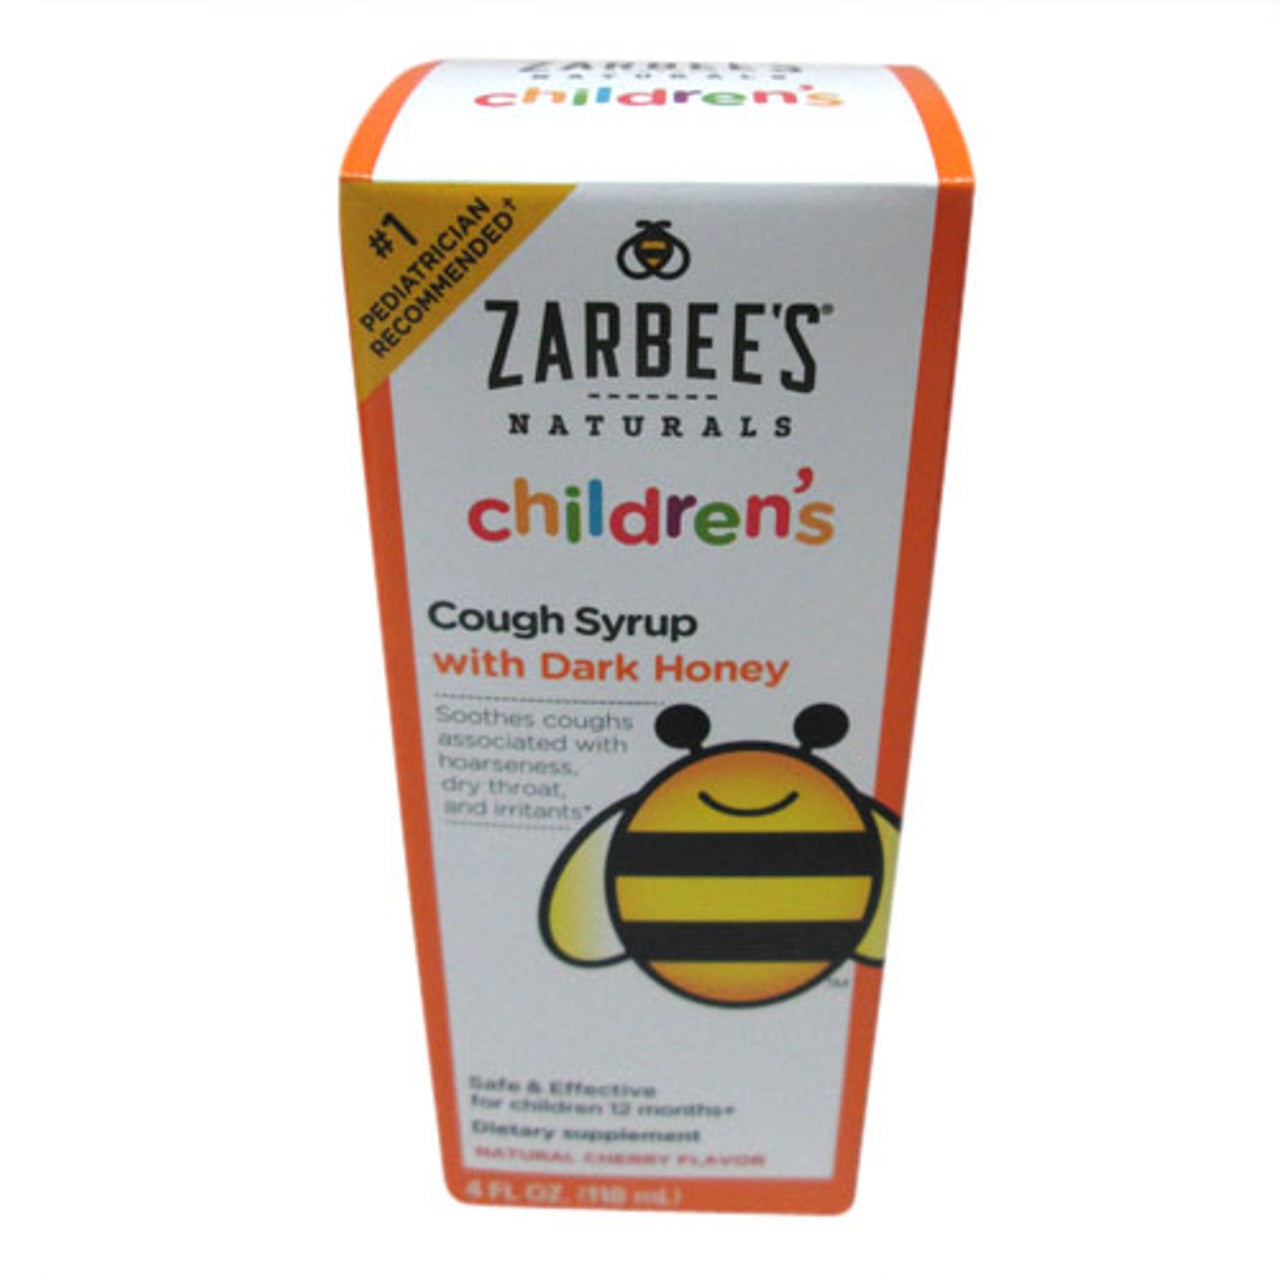 Zarbees All Natural Childrens Cough Syrup With Dark Honey, Cherry Flavor, 4 Oz